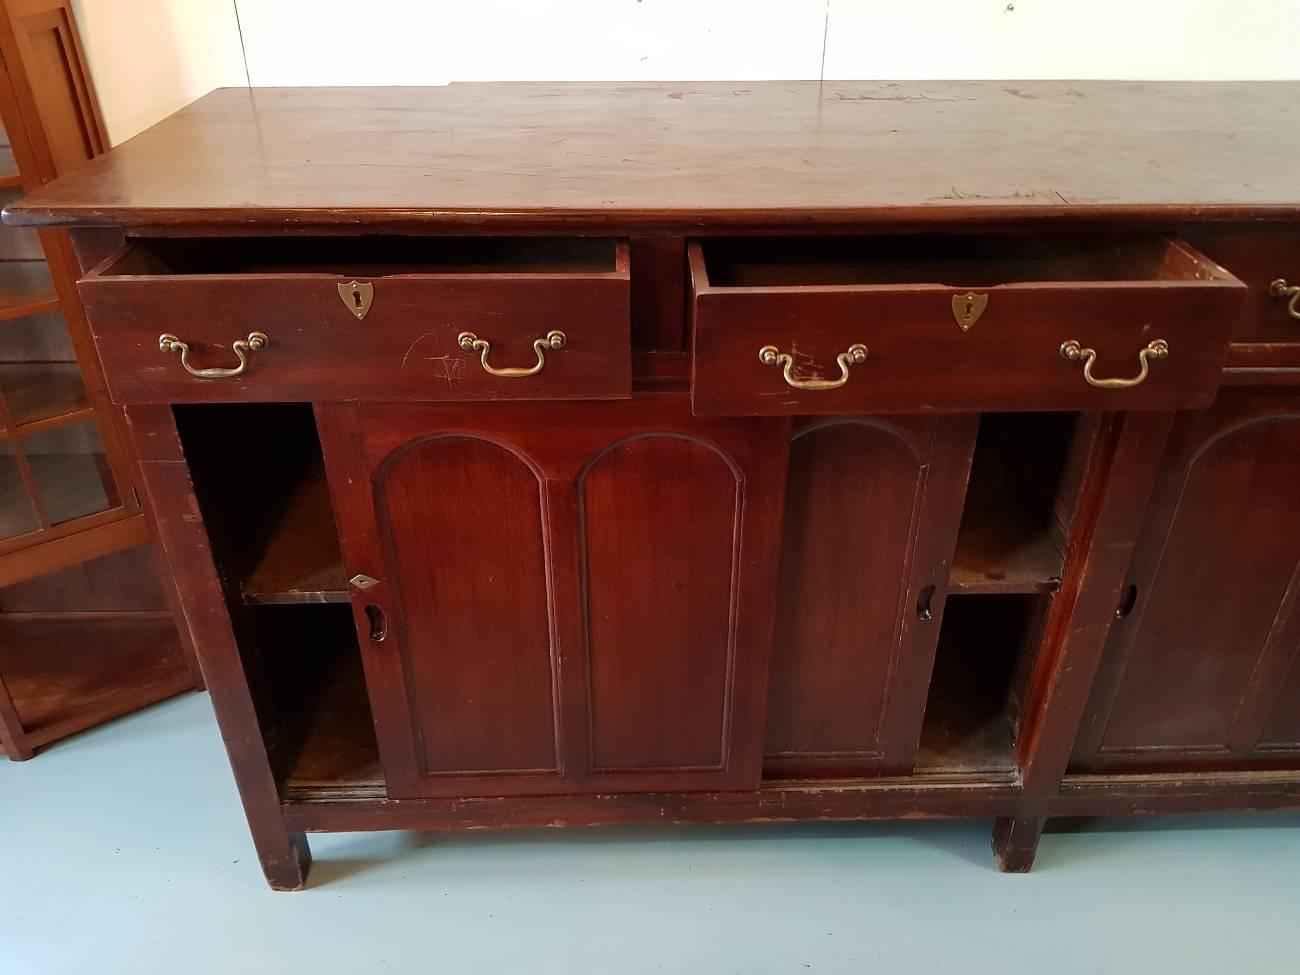 Large English solid Mahogany dresser from the second half of the 19th century with four large drawers and below four sliding doors.

The measurements are,
Depth 75 cm/ 29.5 inch.
Width 275 cm/ 108 inch.
Height 121.5 cm/ 47.8 inch.